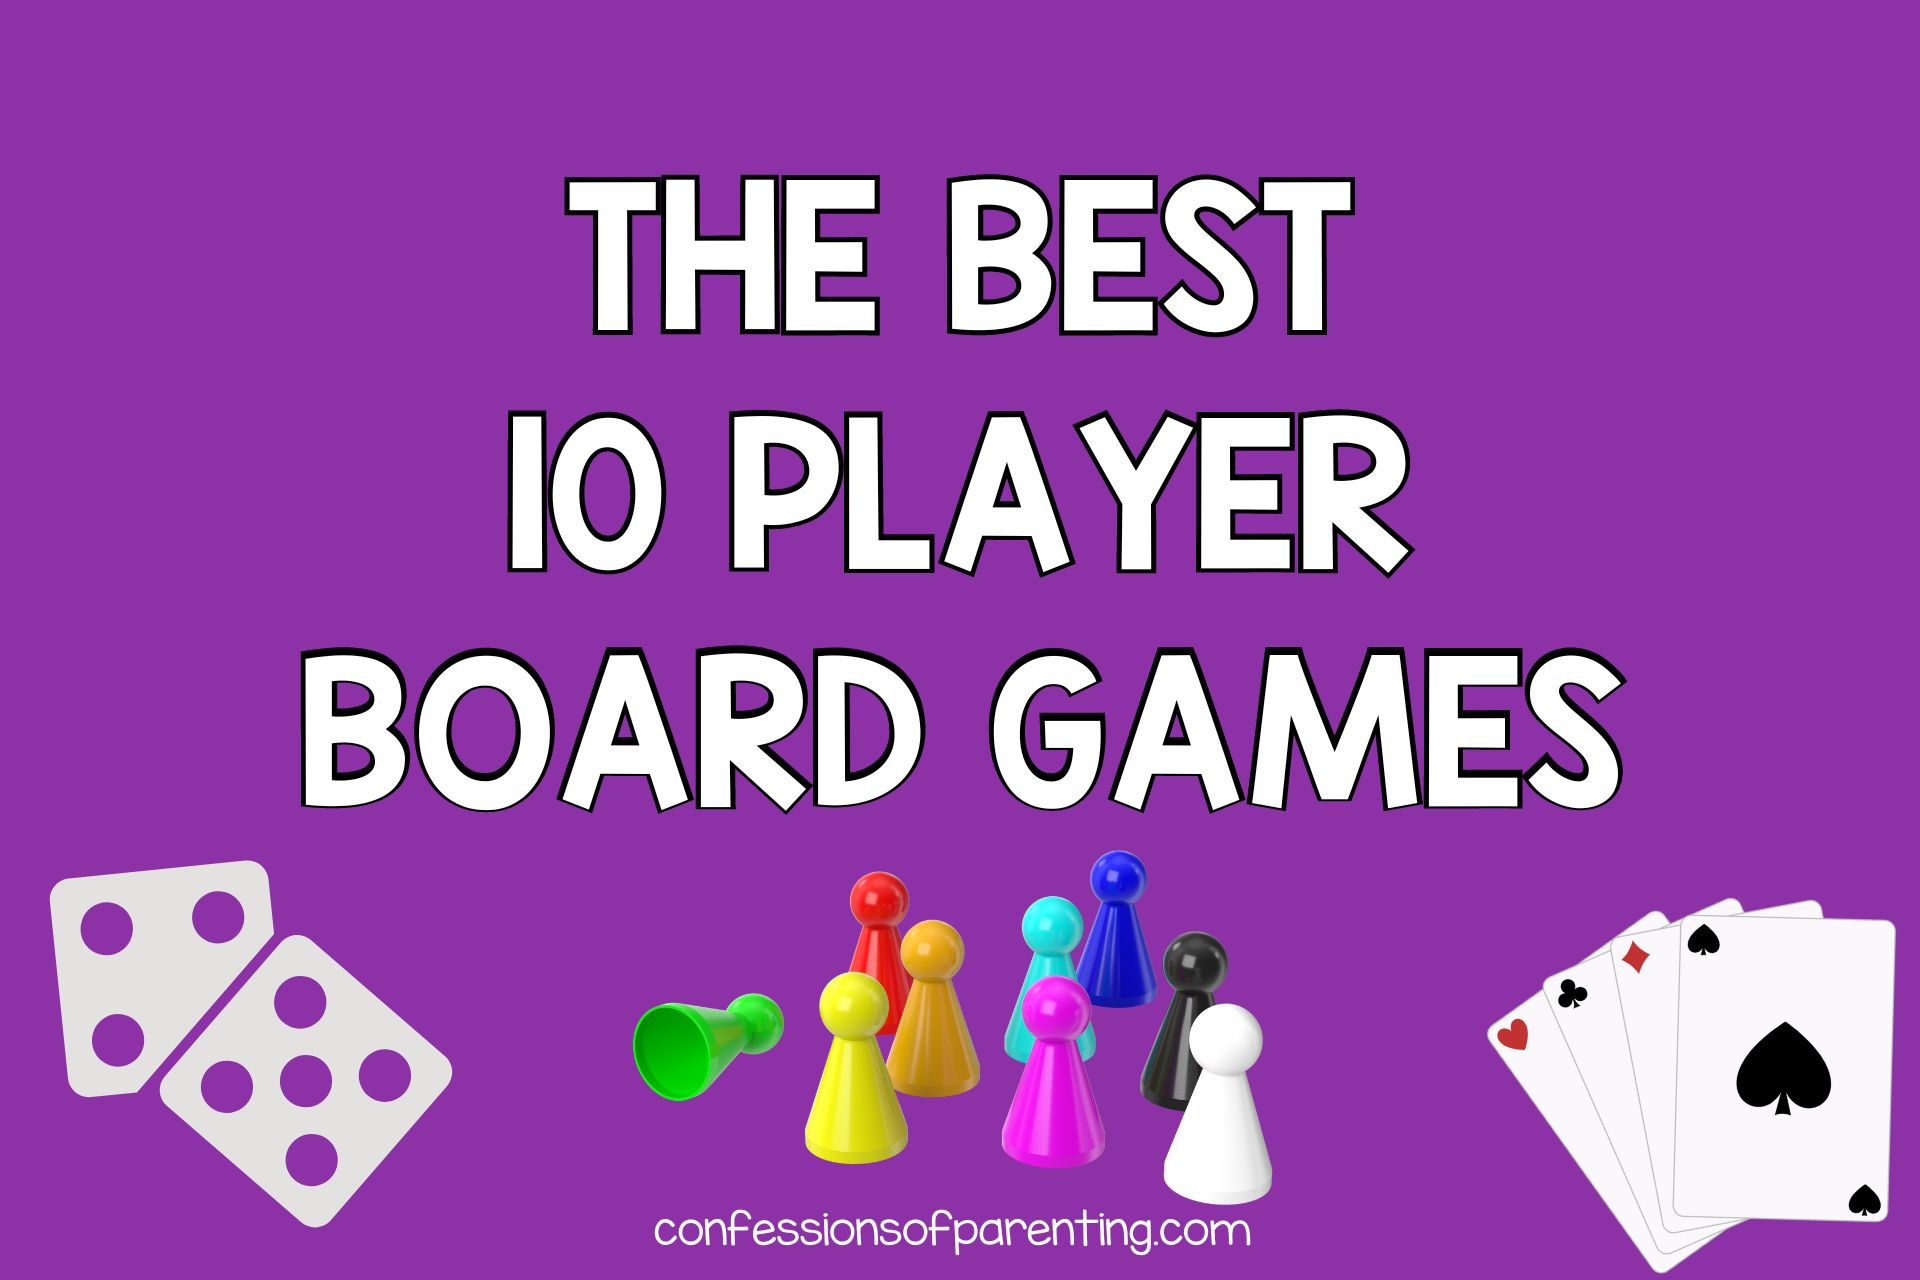 10 PLAYER BOARD GAMES